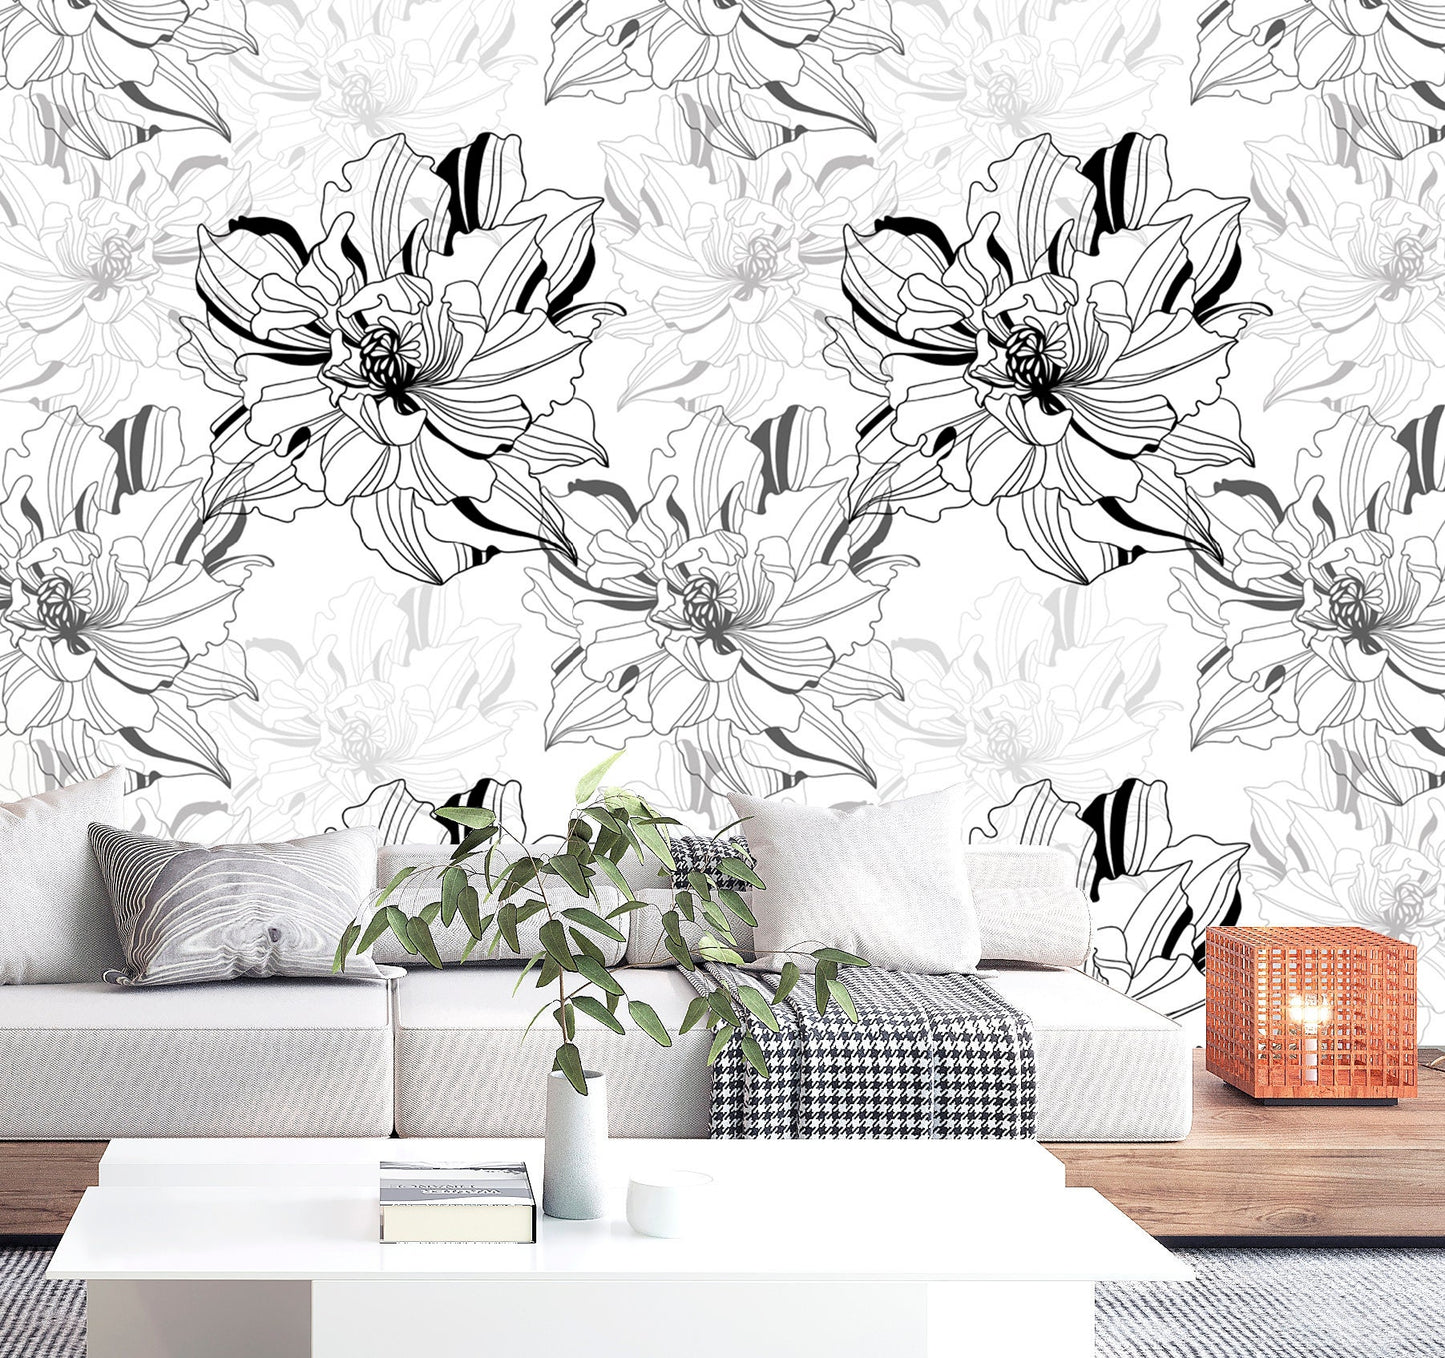 Black and White Peony Wallpaper Peel and Stick, Large Flowers Wallpaper, Removable Wall Paper